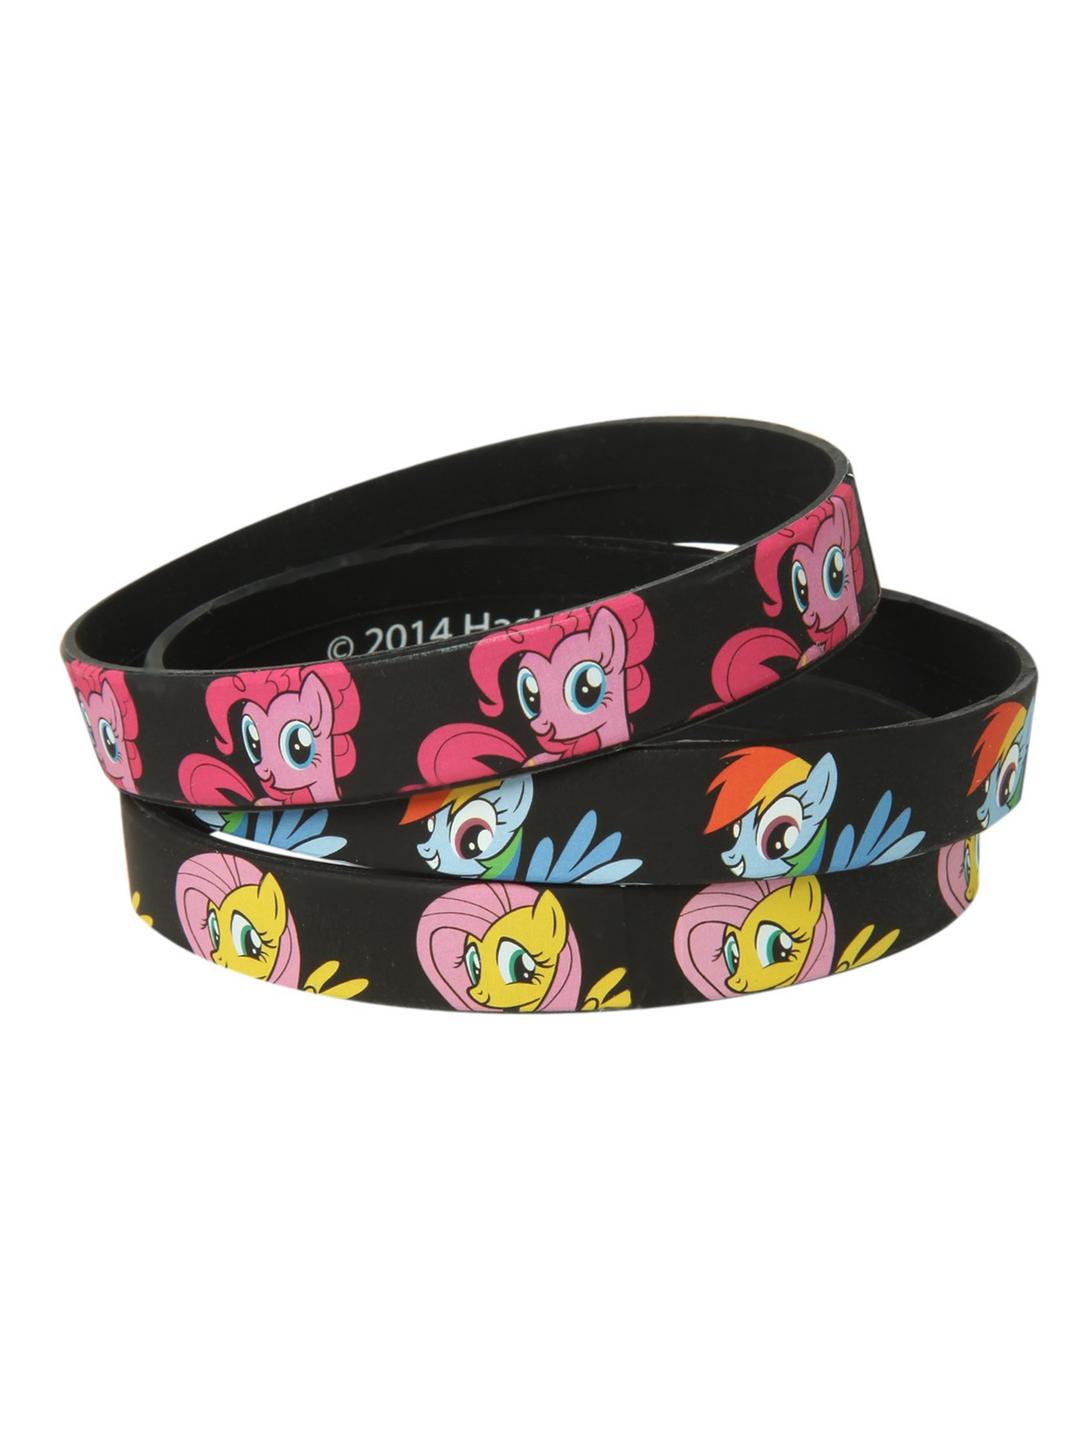 My Little Pony Pinkie Pie Fluttershy And Rainbow Dash Rubber Bracelet 3 Pack, , hi-res